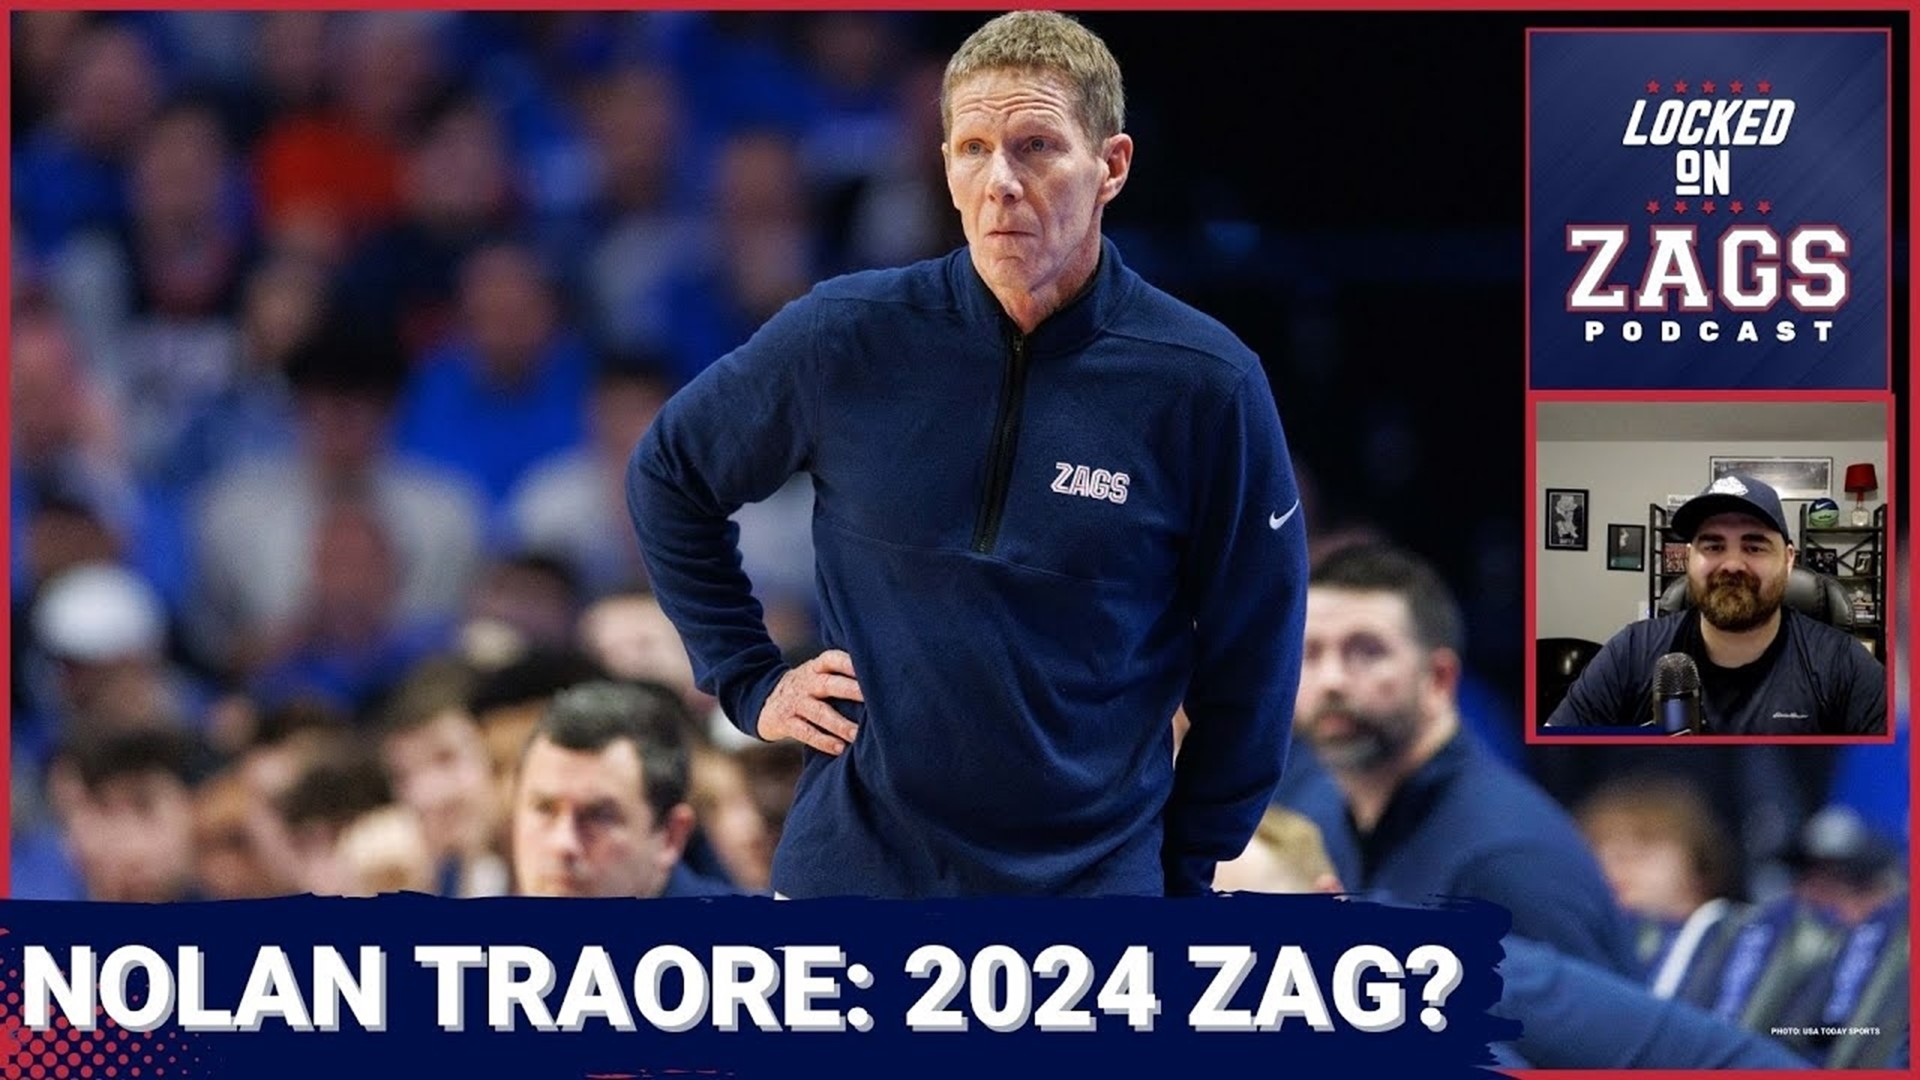 Mark Few and the Gonzaga Bulldogs have not landed a recruit in the class of 2024, but they are heavily involved with a 6'5 guard from France, Nolan Traore.